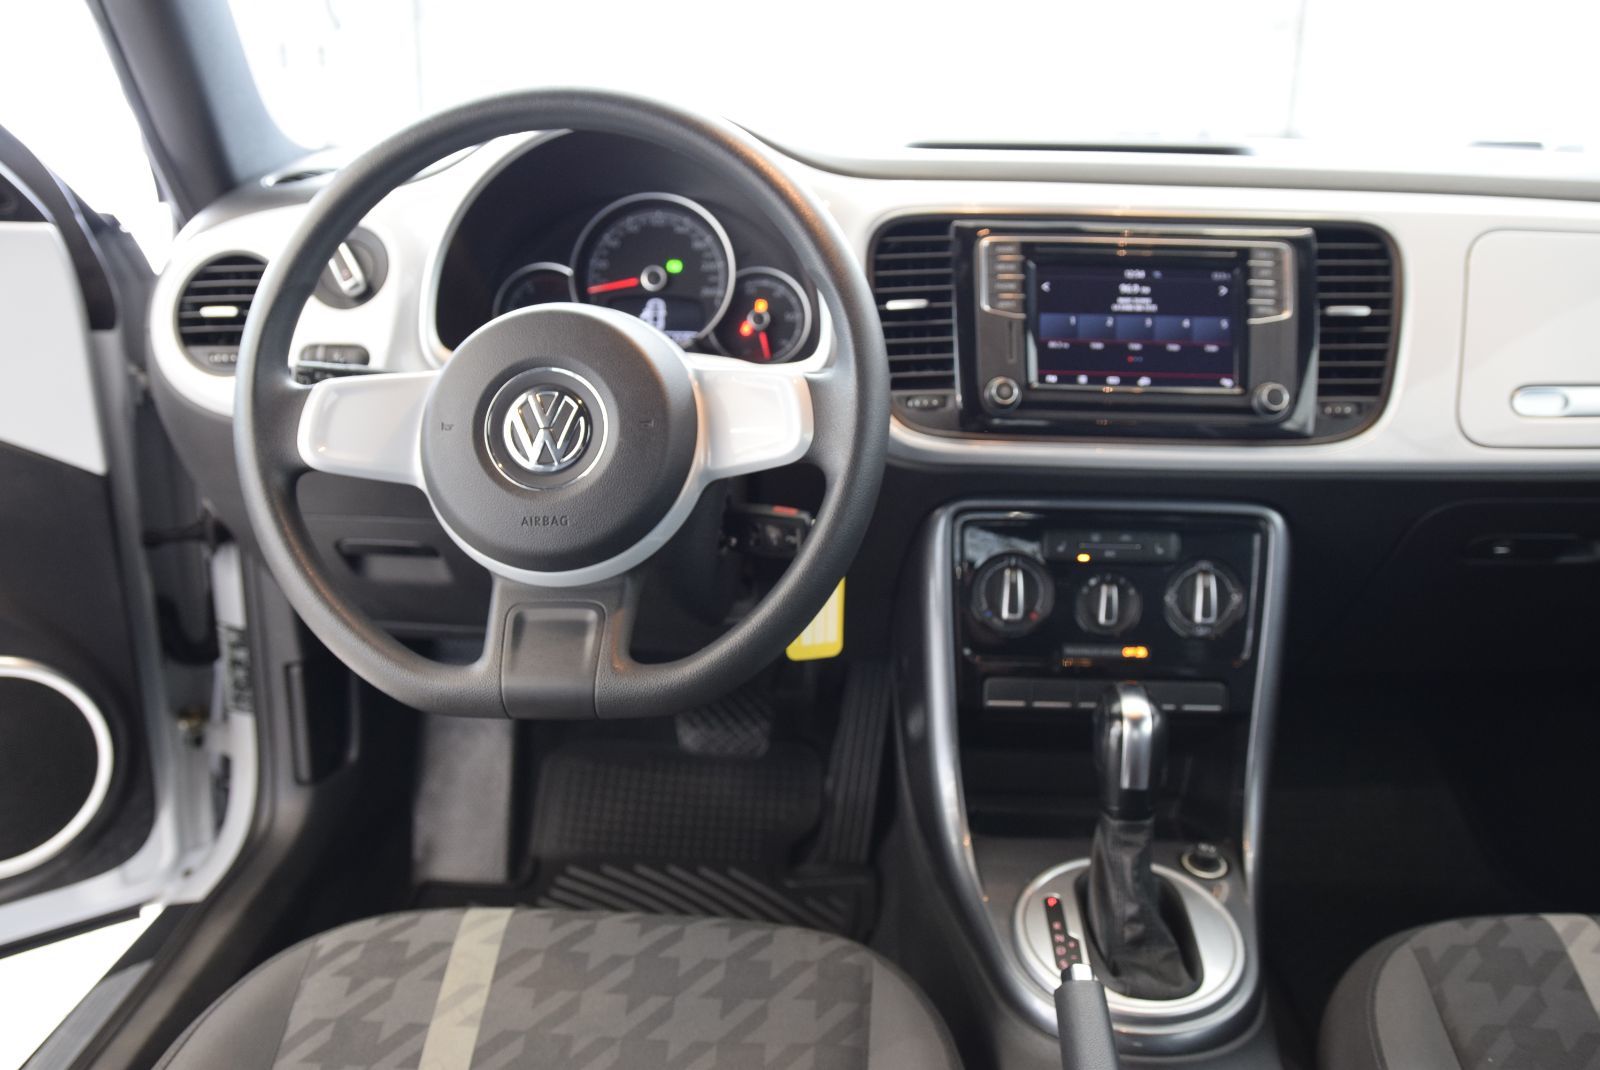 Volkswagen Beetle CONVERTIBLE+MAG+APP CONNECT 2018 BLUETOOTH+SIEGES CHAUFFANTS